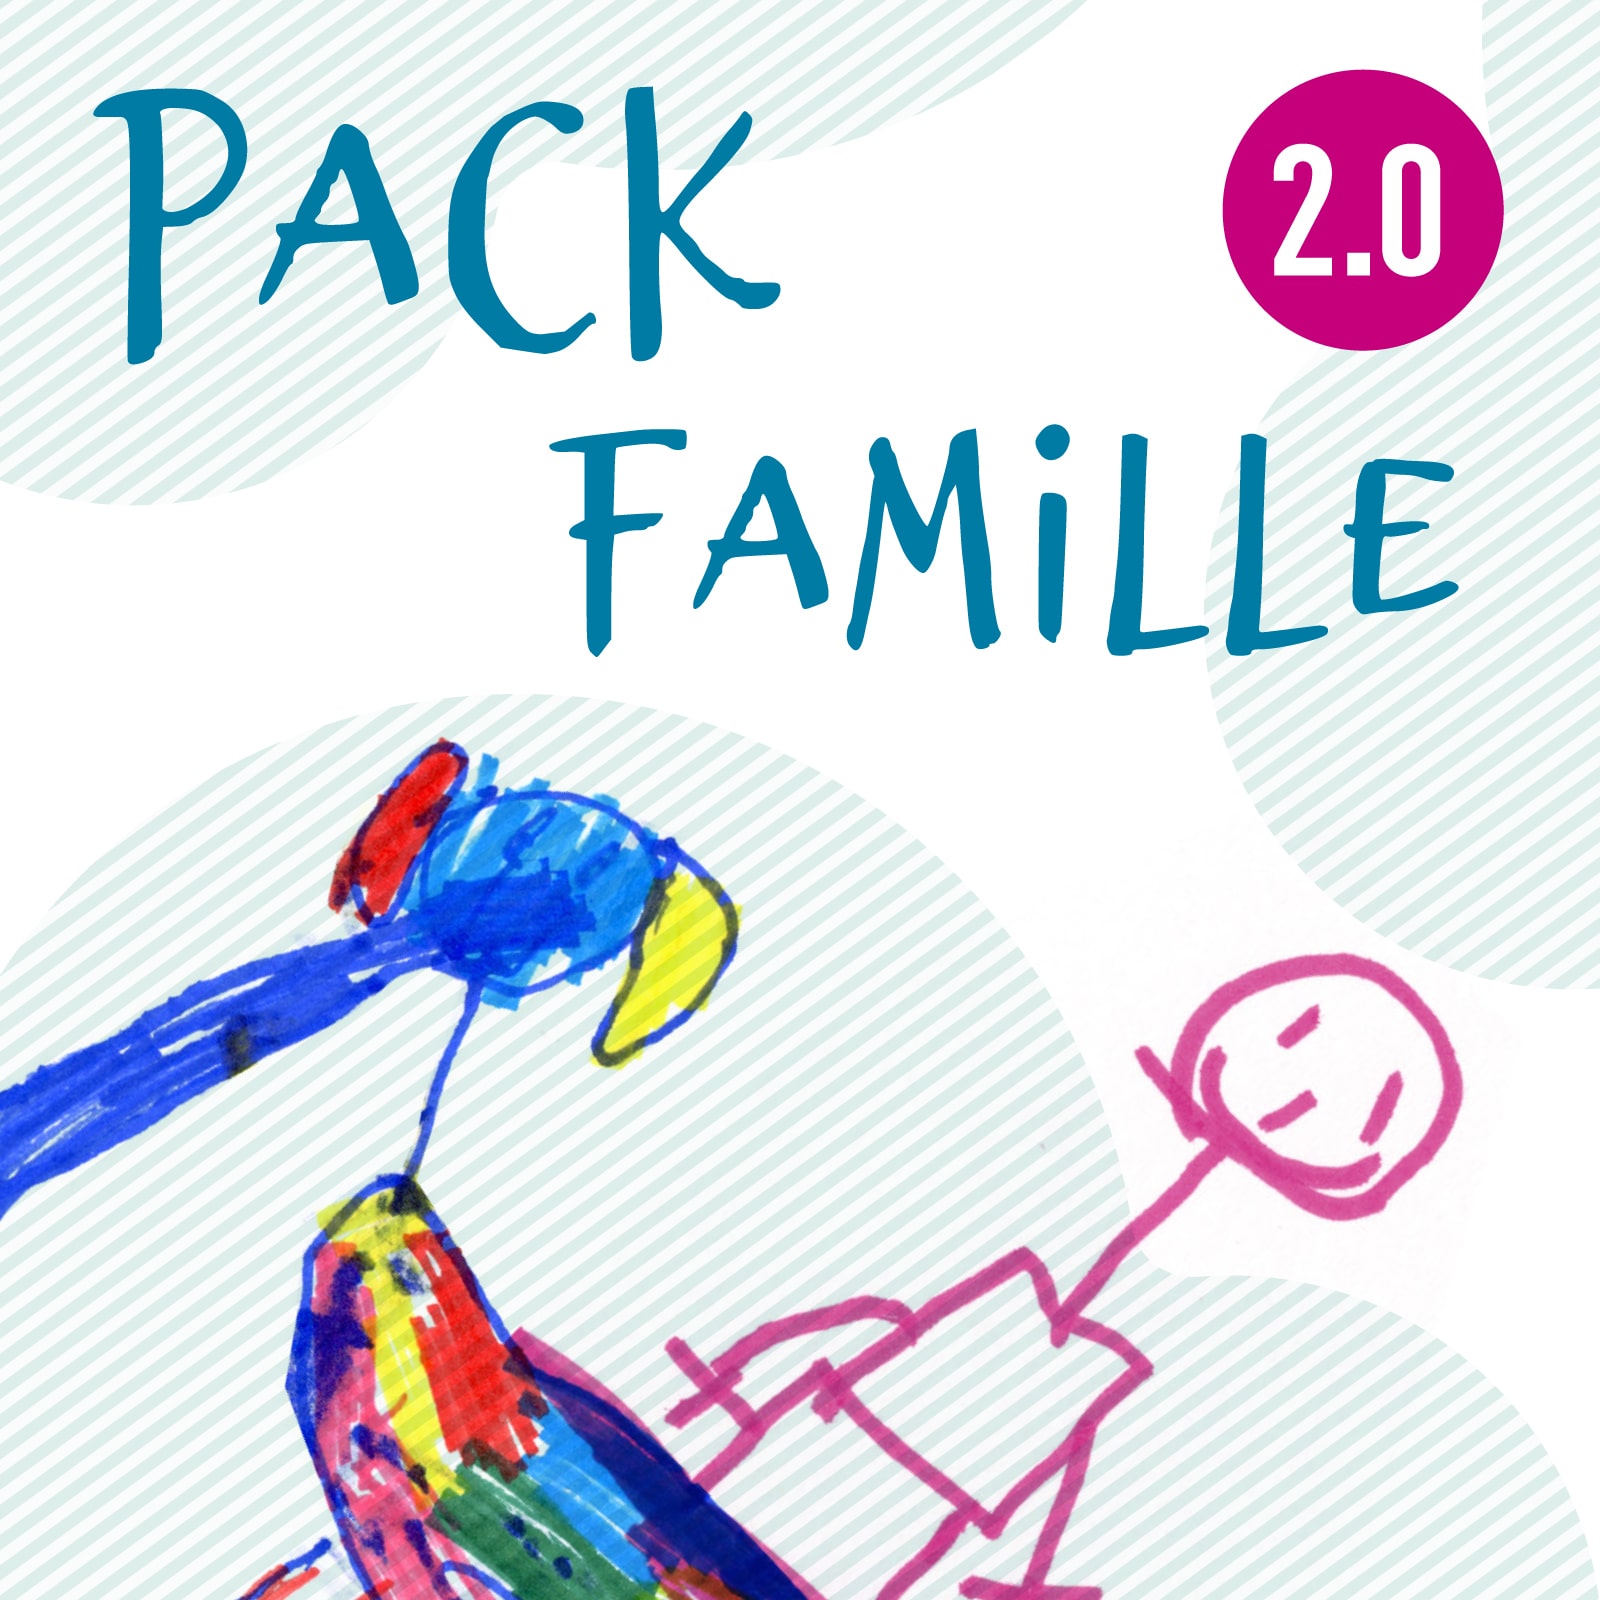 Pack famille 2.0 (A1-A2)